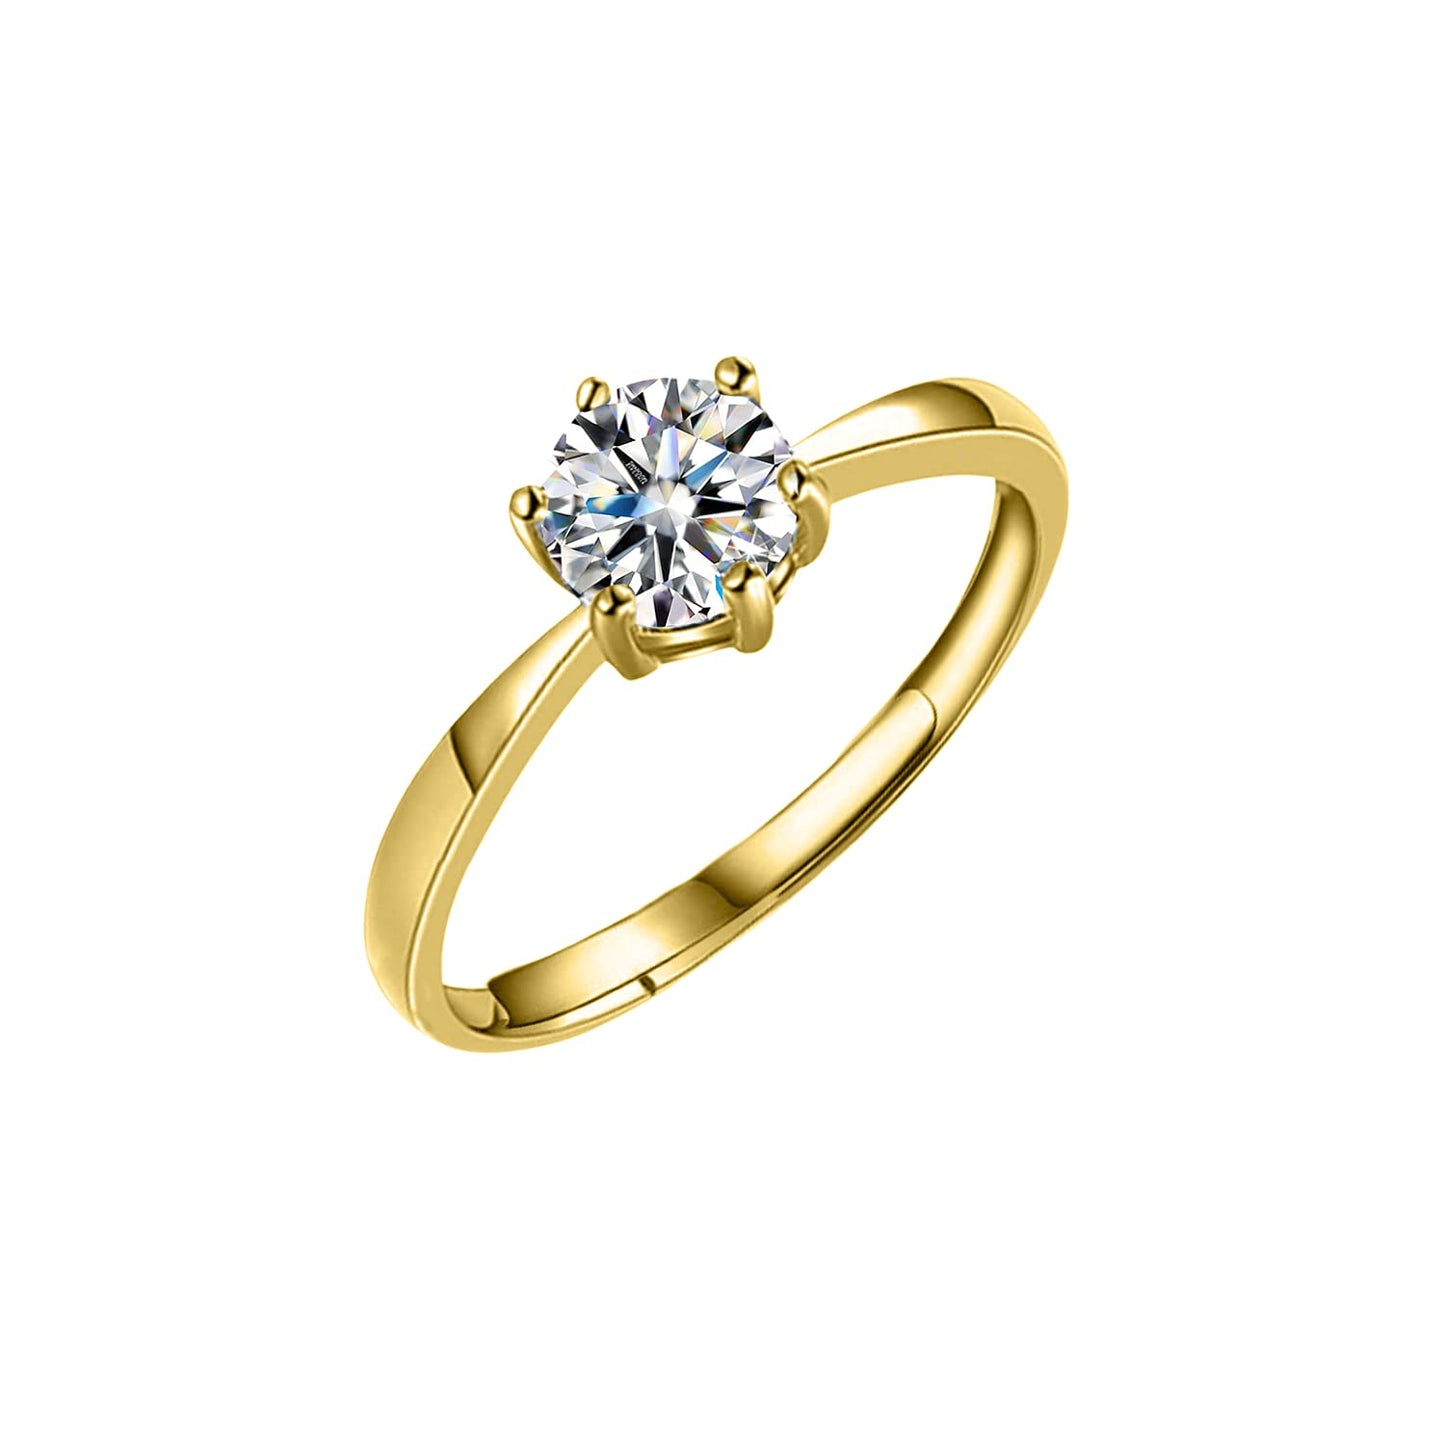 Solitaire Ring Classic Adjustable embellished with Swarovski Zirconia - 92.5 Silver in 18K Gold Finish